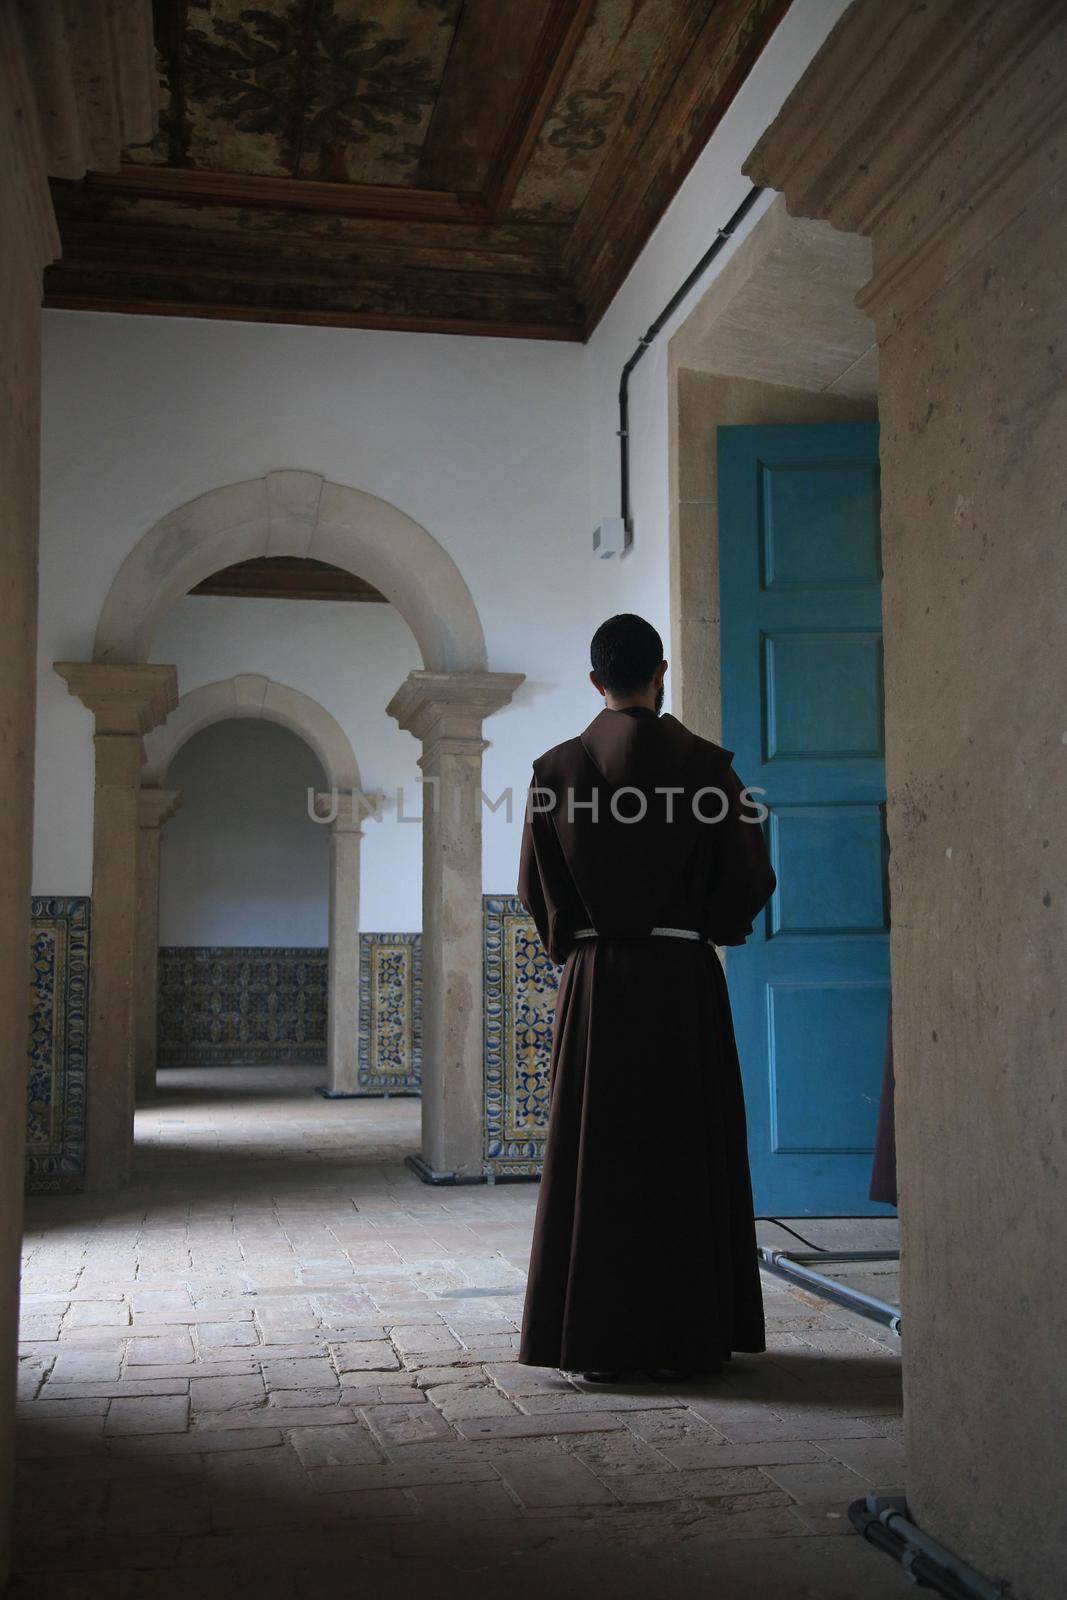 salvador, bahia, brazil - june 16, 2022: Franciscan monk seen during Corpus Christi holiday celebration at the Basilica Cathedral of the city of Salvador